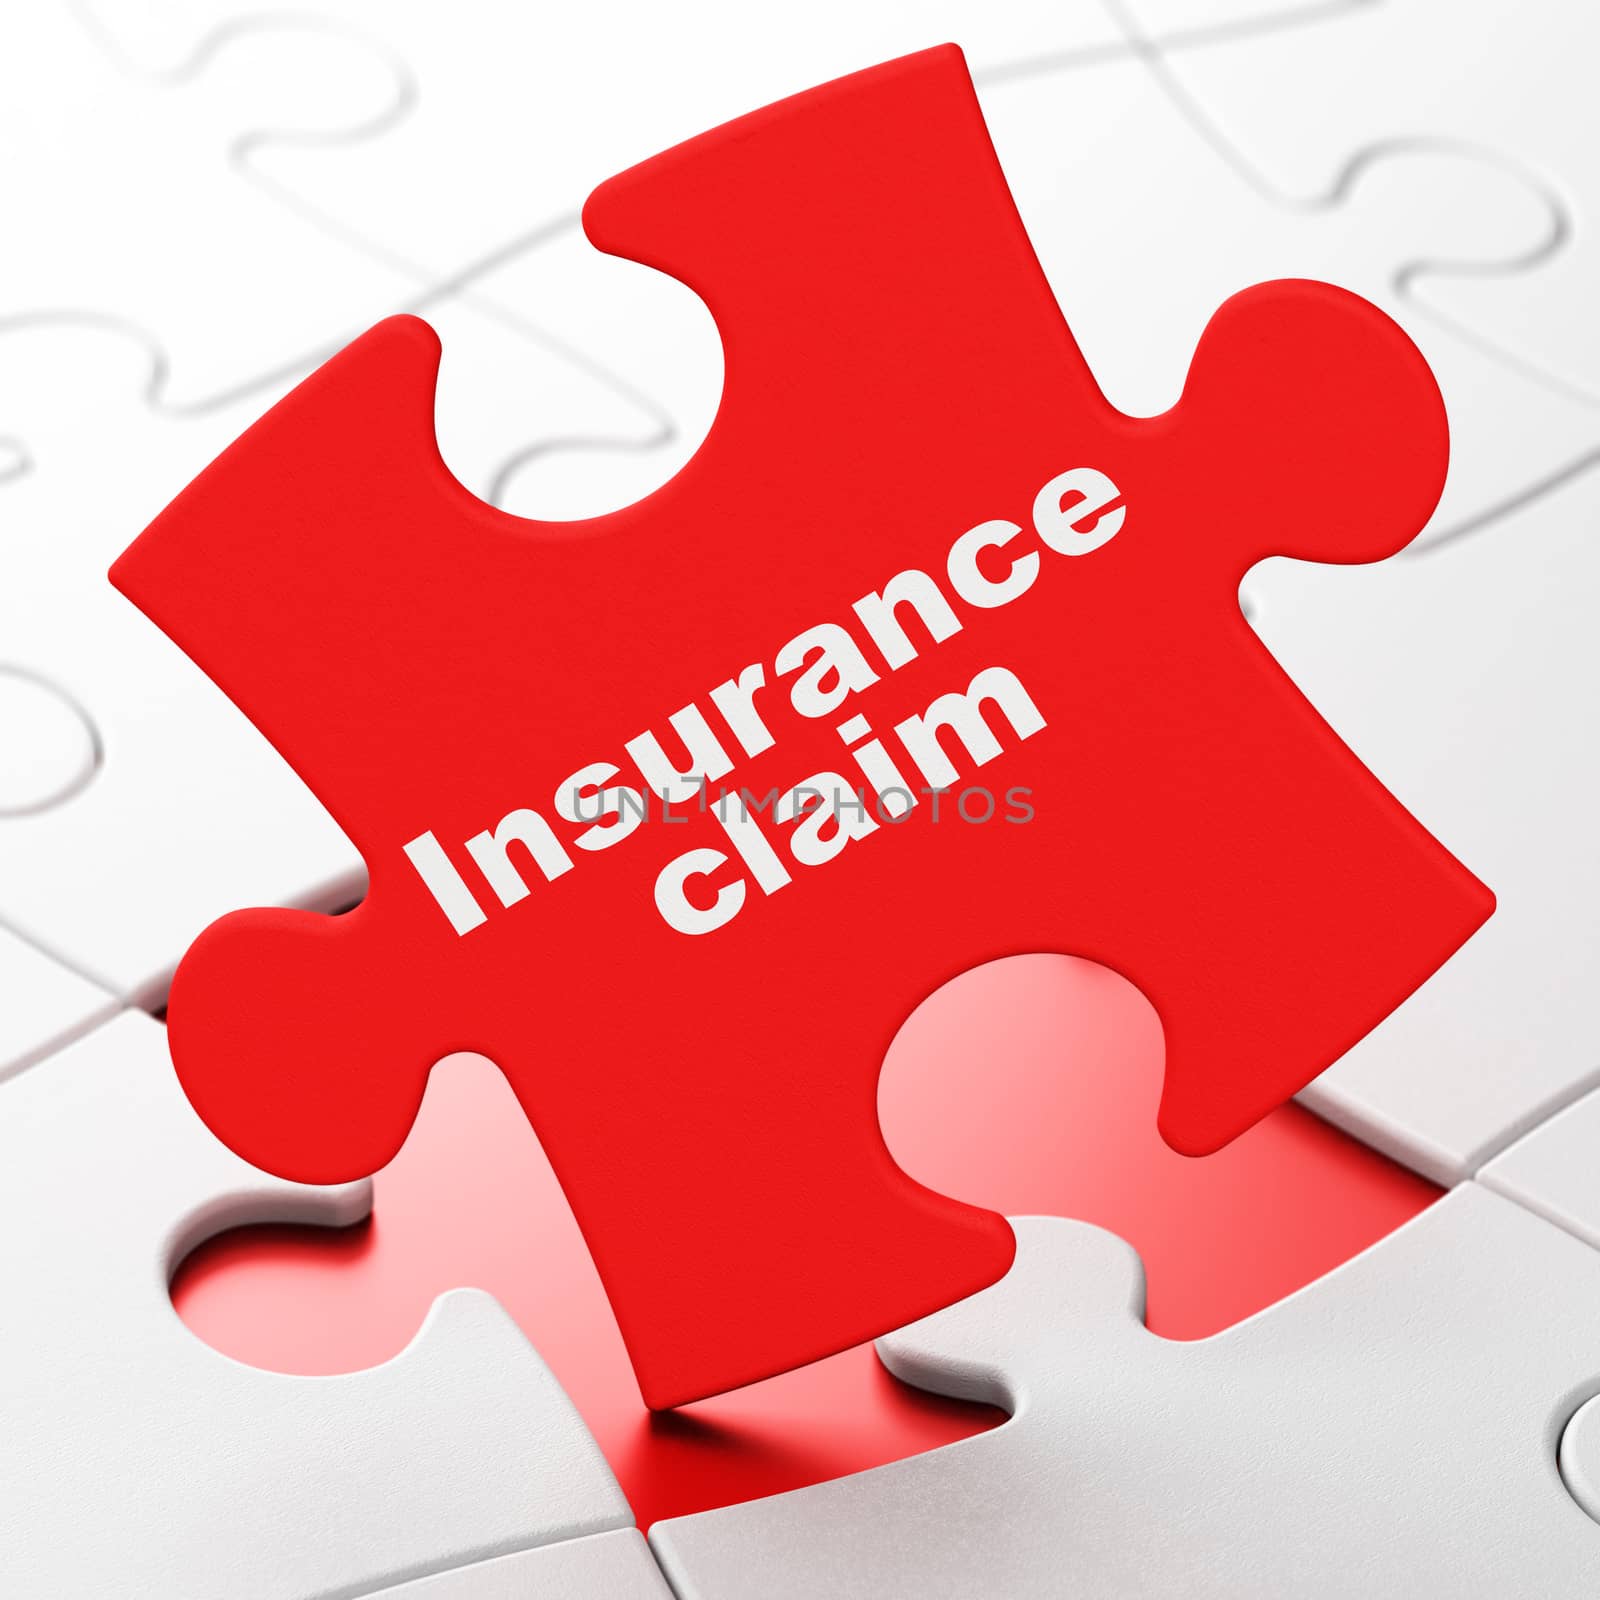 Insurance concept: Insurance Claim on Red puzzle pieces background, 3D rendering